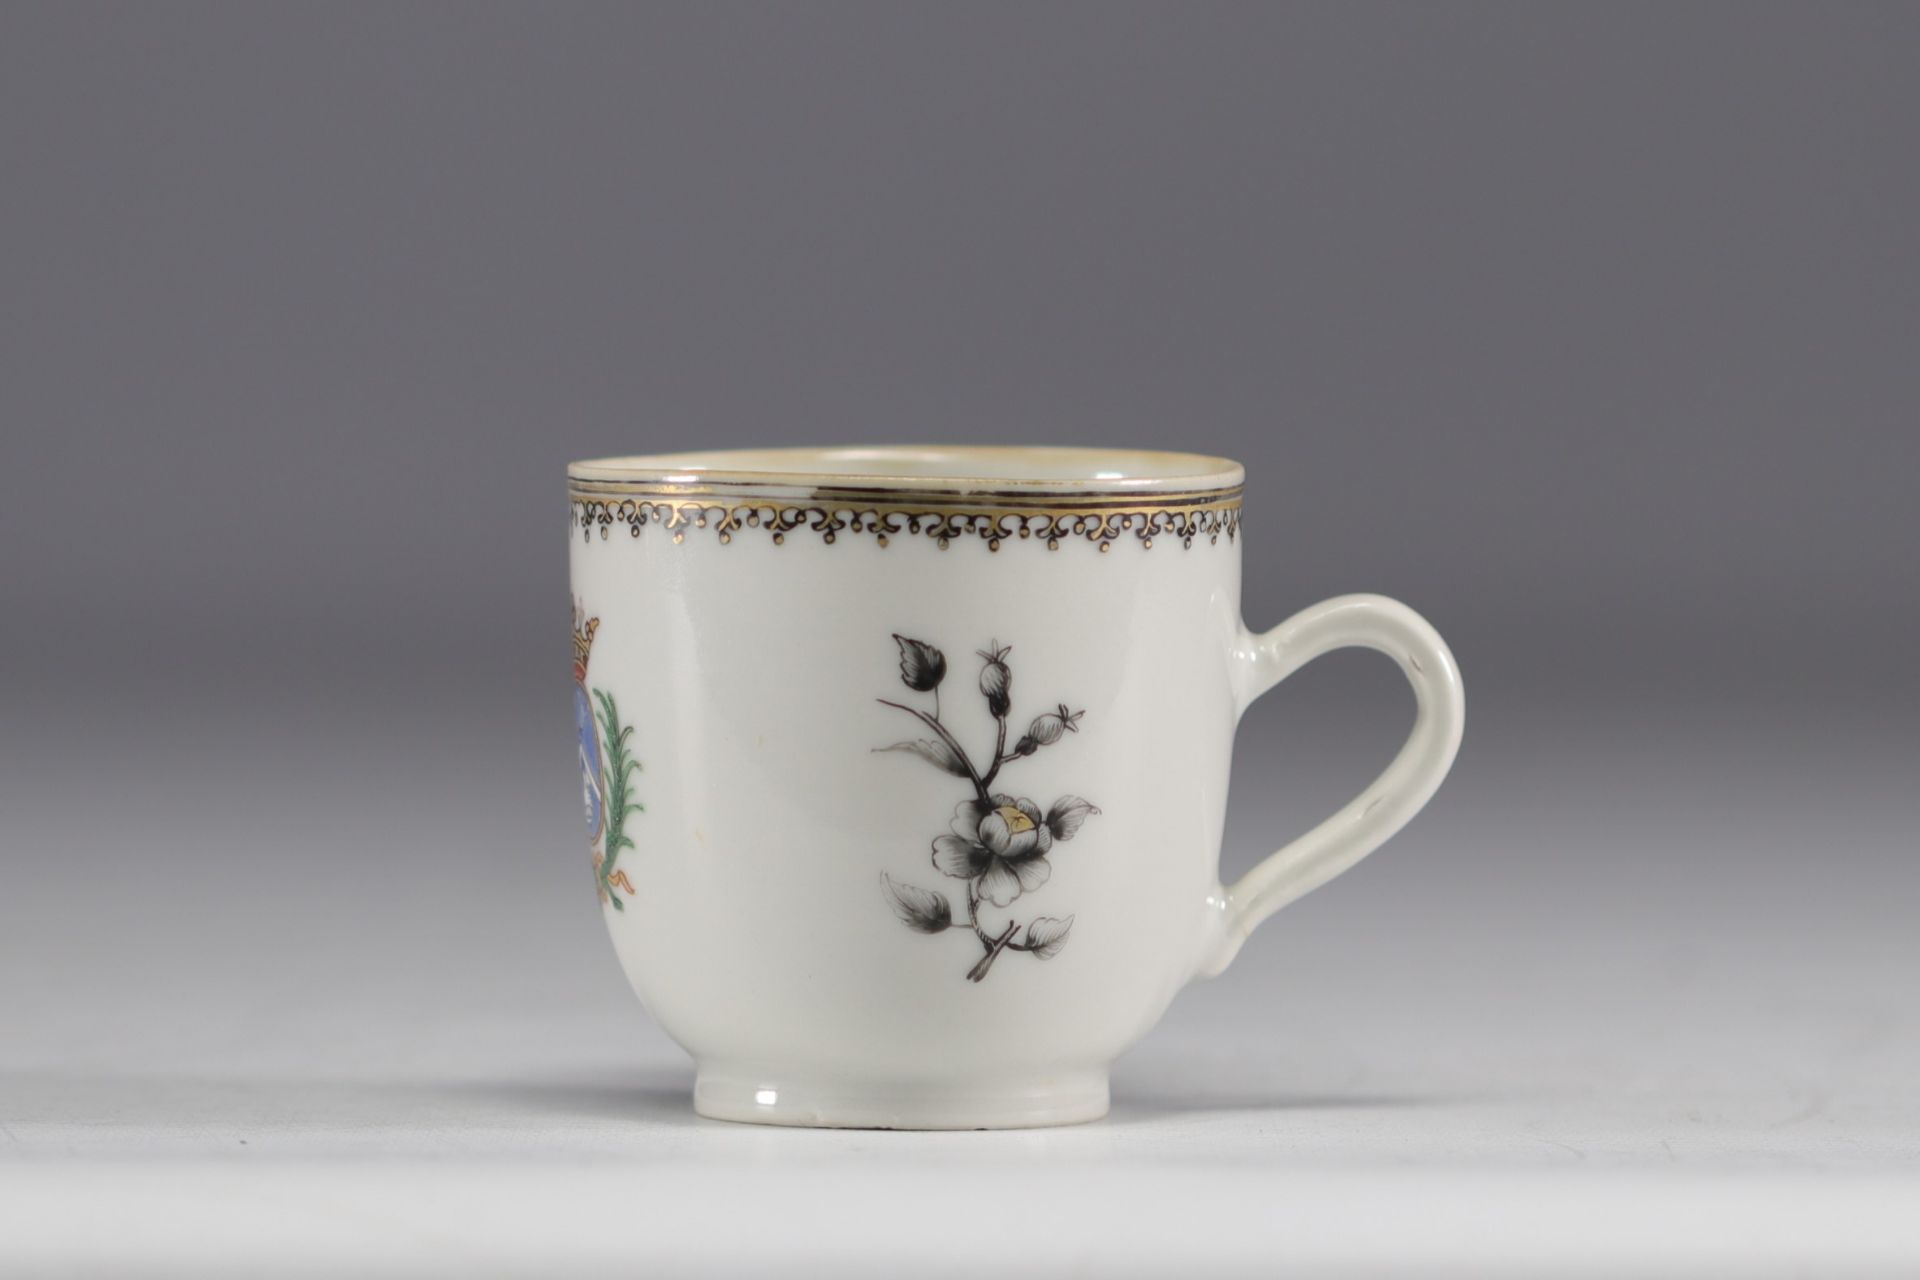 China - A Compagnie des Indes "Grisaille" porcelain cup decorated with a coat of arms and flowers, 1 - Image 4 of 4